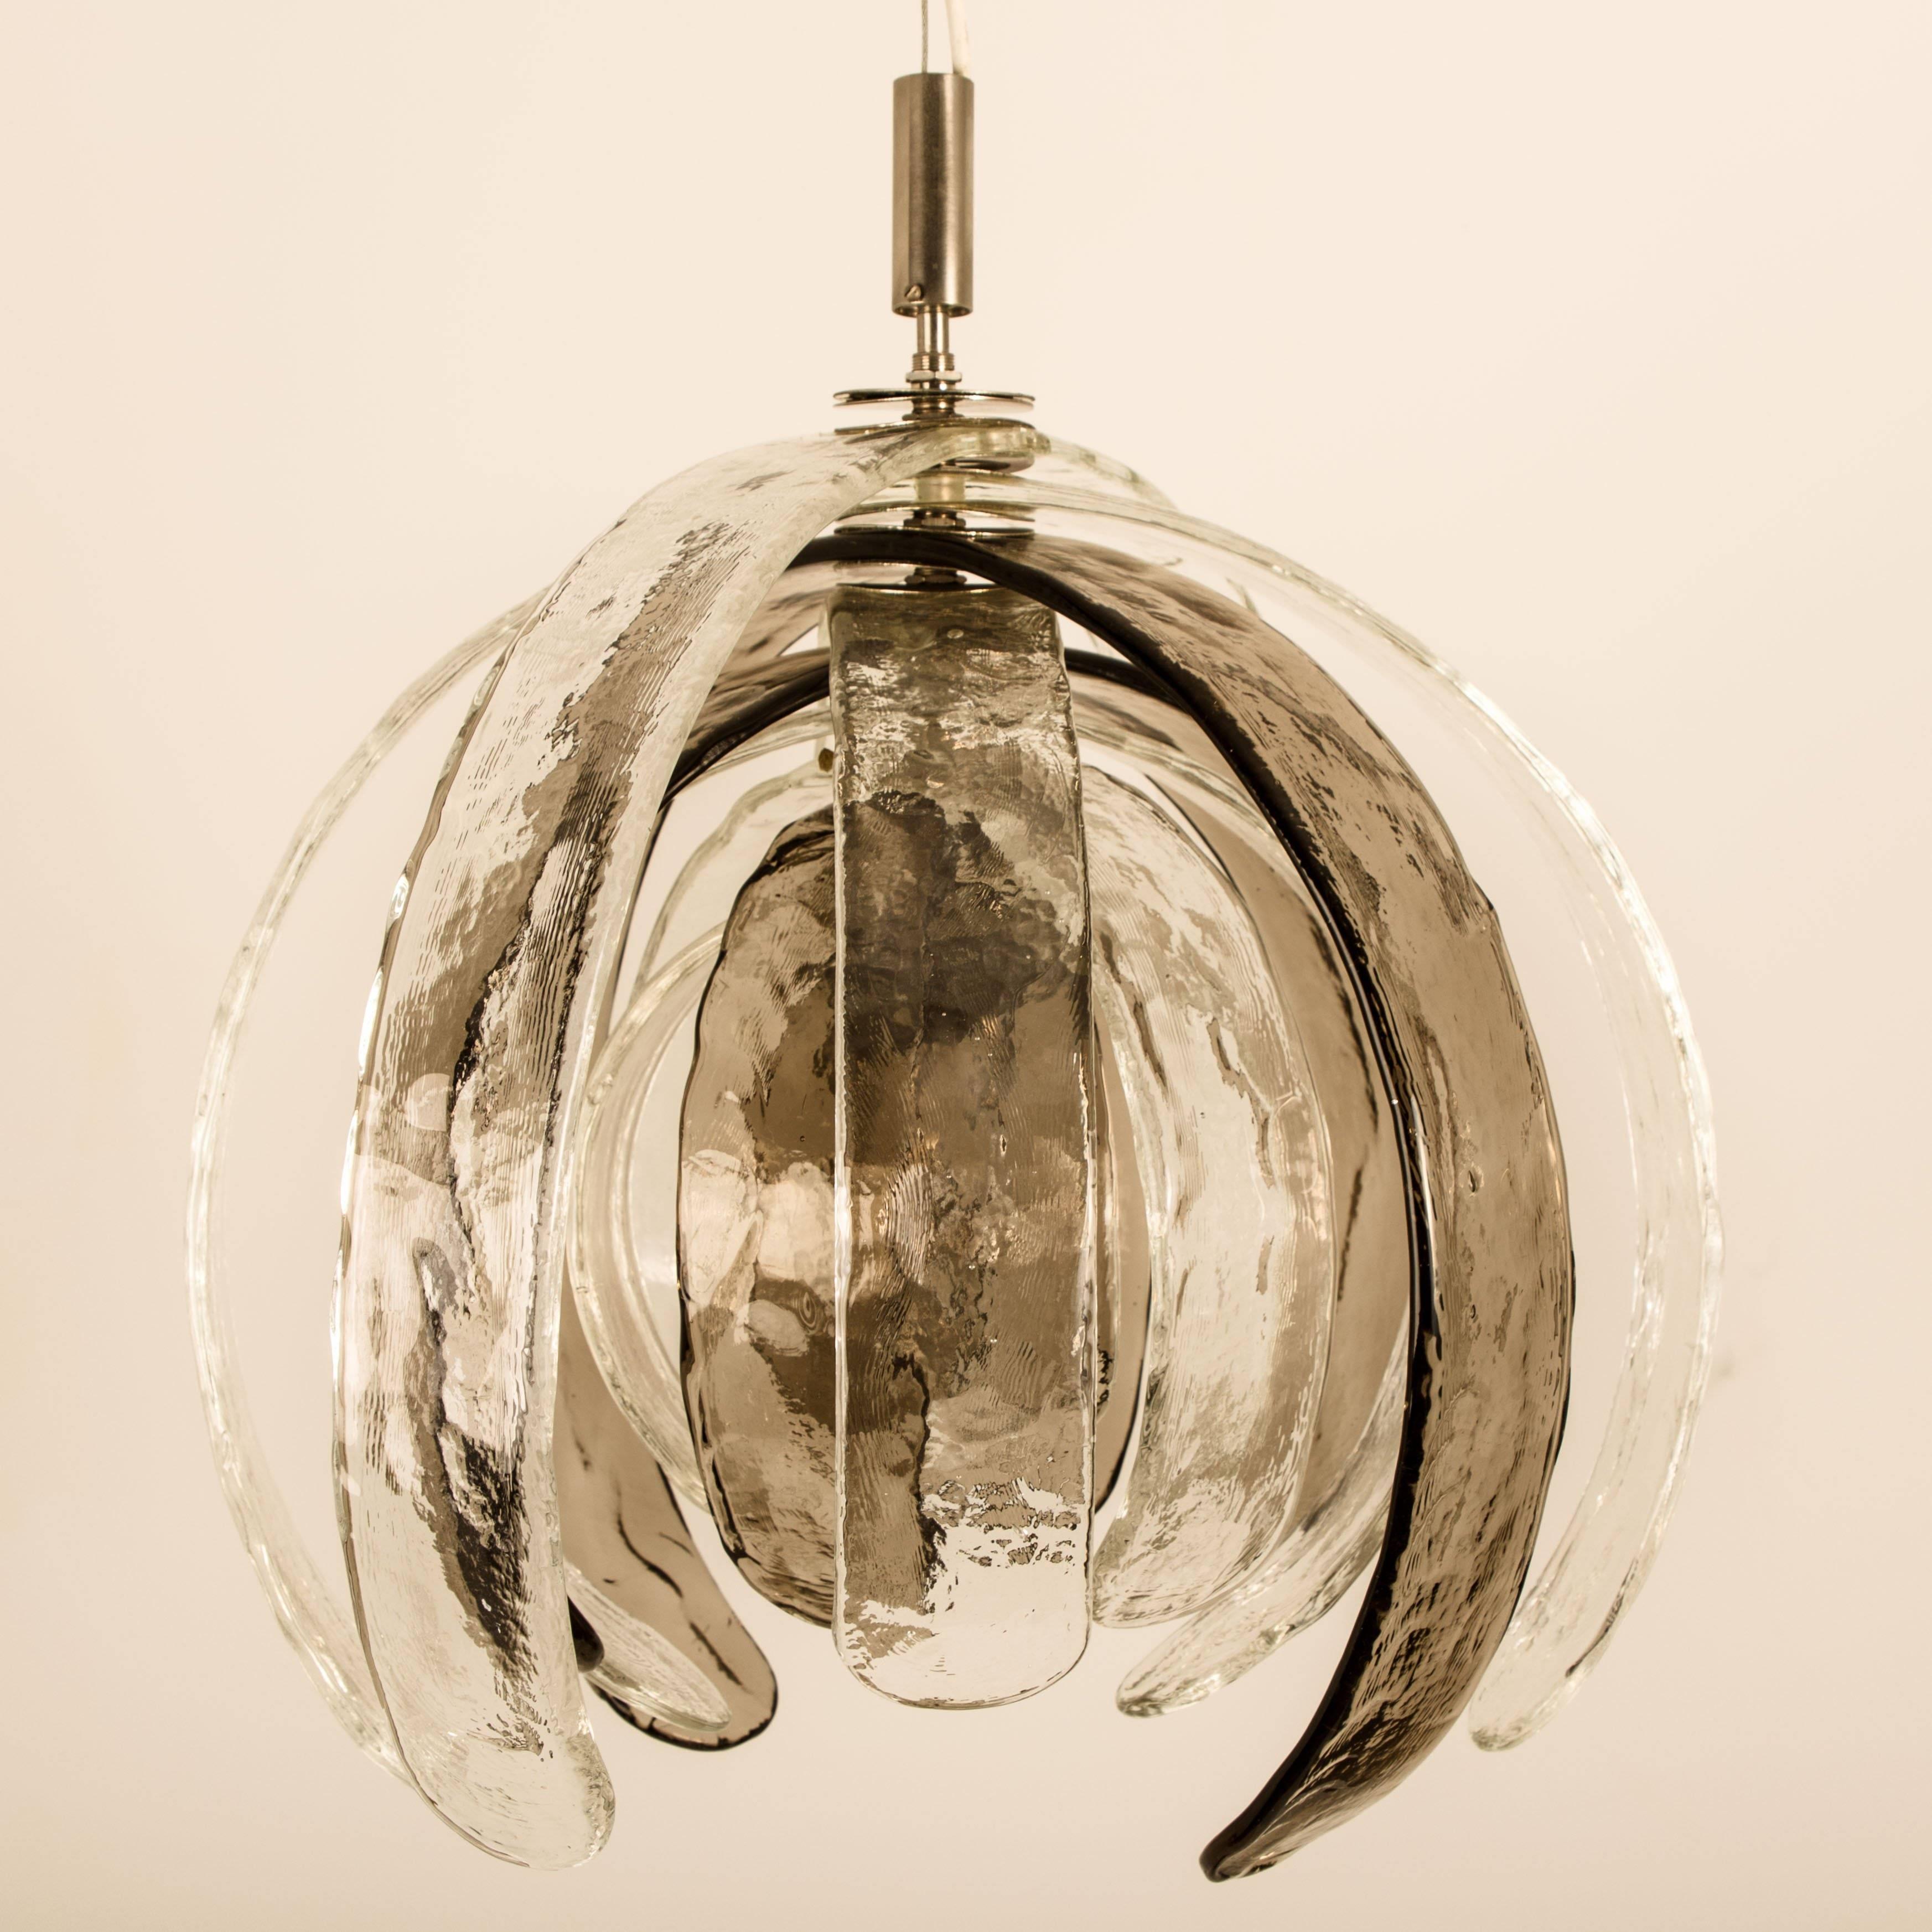 High-end sculptural artichoke chandelier by Carlo Nason for Mazzega. Thick clear and bronzem textured glass blades.The blades can be put in the position of one line as unfolding into a flower.

This is the largest size, The 12 handmade Murano